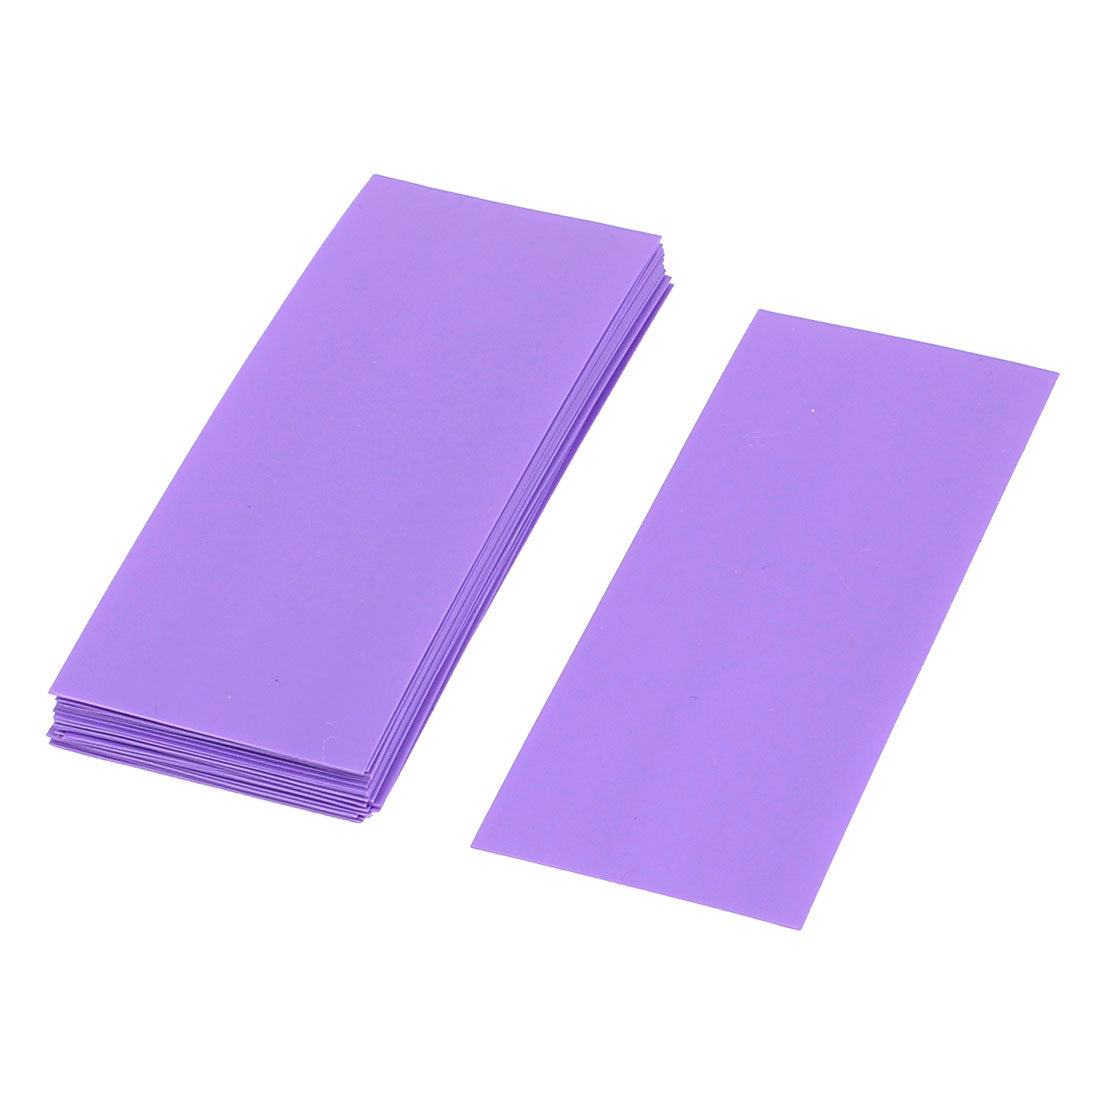 uxcell Uxcell 20pcs 72mm x 18.5mm PVC Heat Shrink Tubing Purple for 1 x 18650 Battery